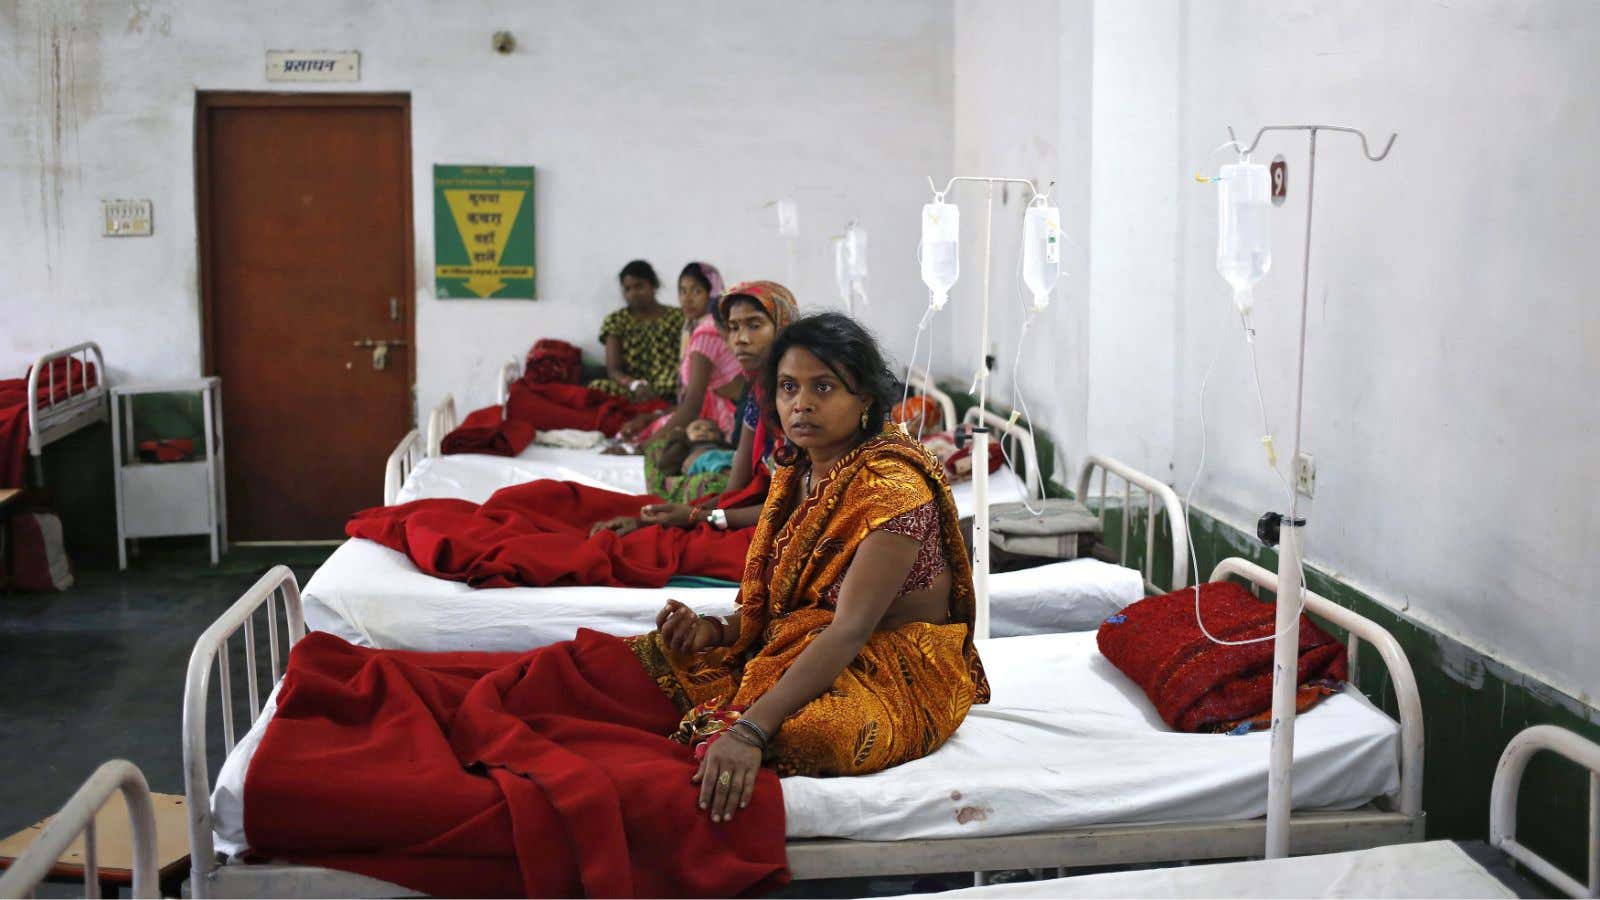 India has built medical infrastructure but services remain minimal.